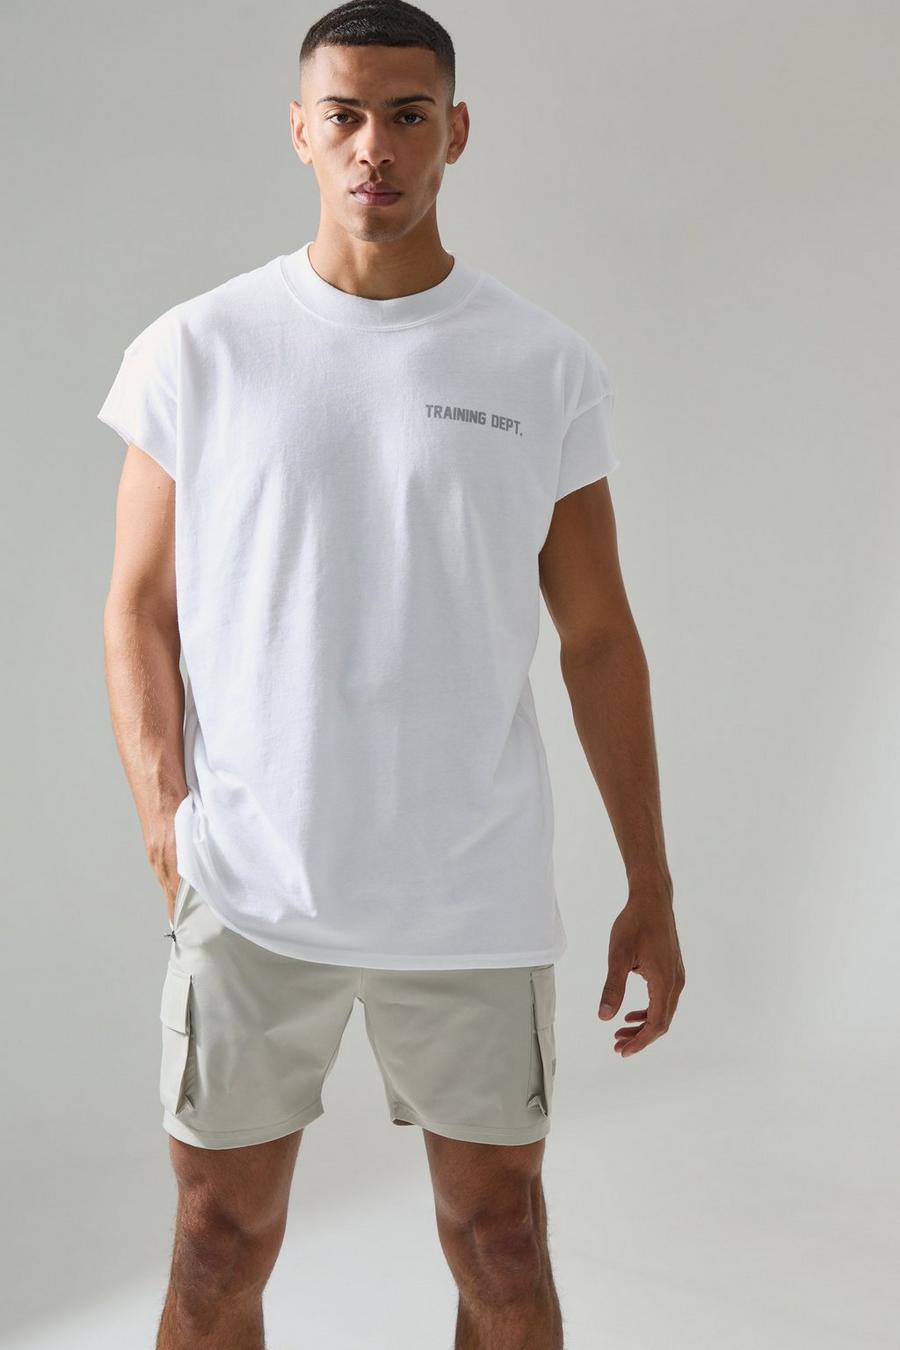 White Active Training Dept Oversized Extended Neck Cut Off T-shirt